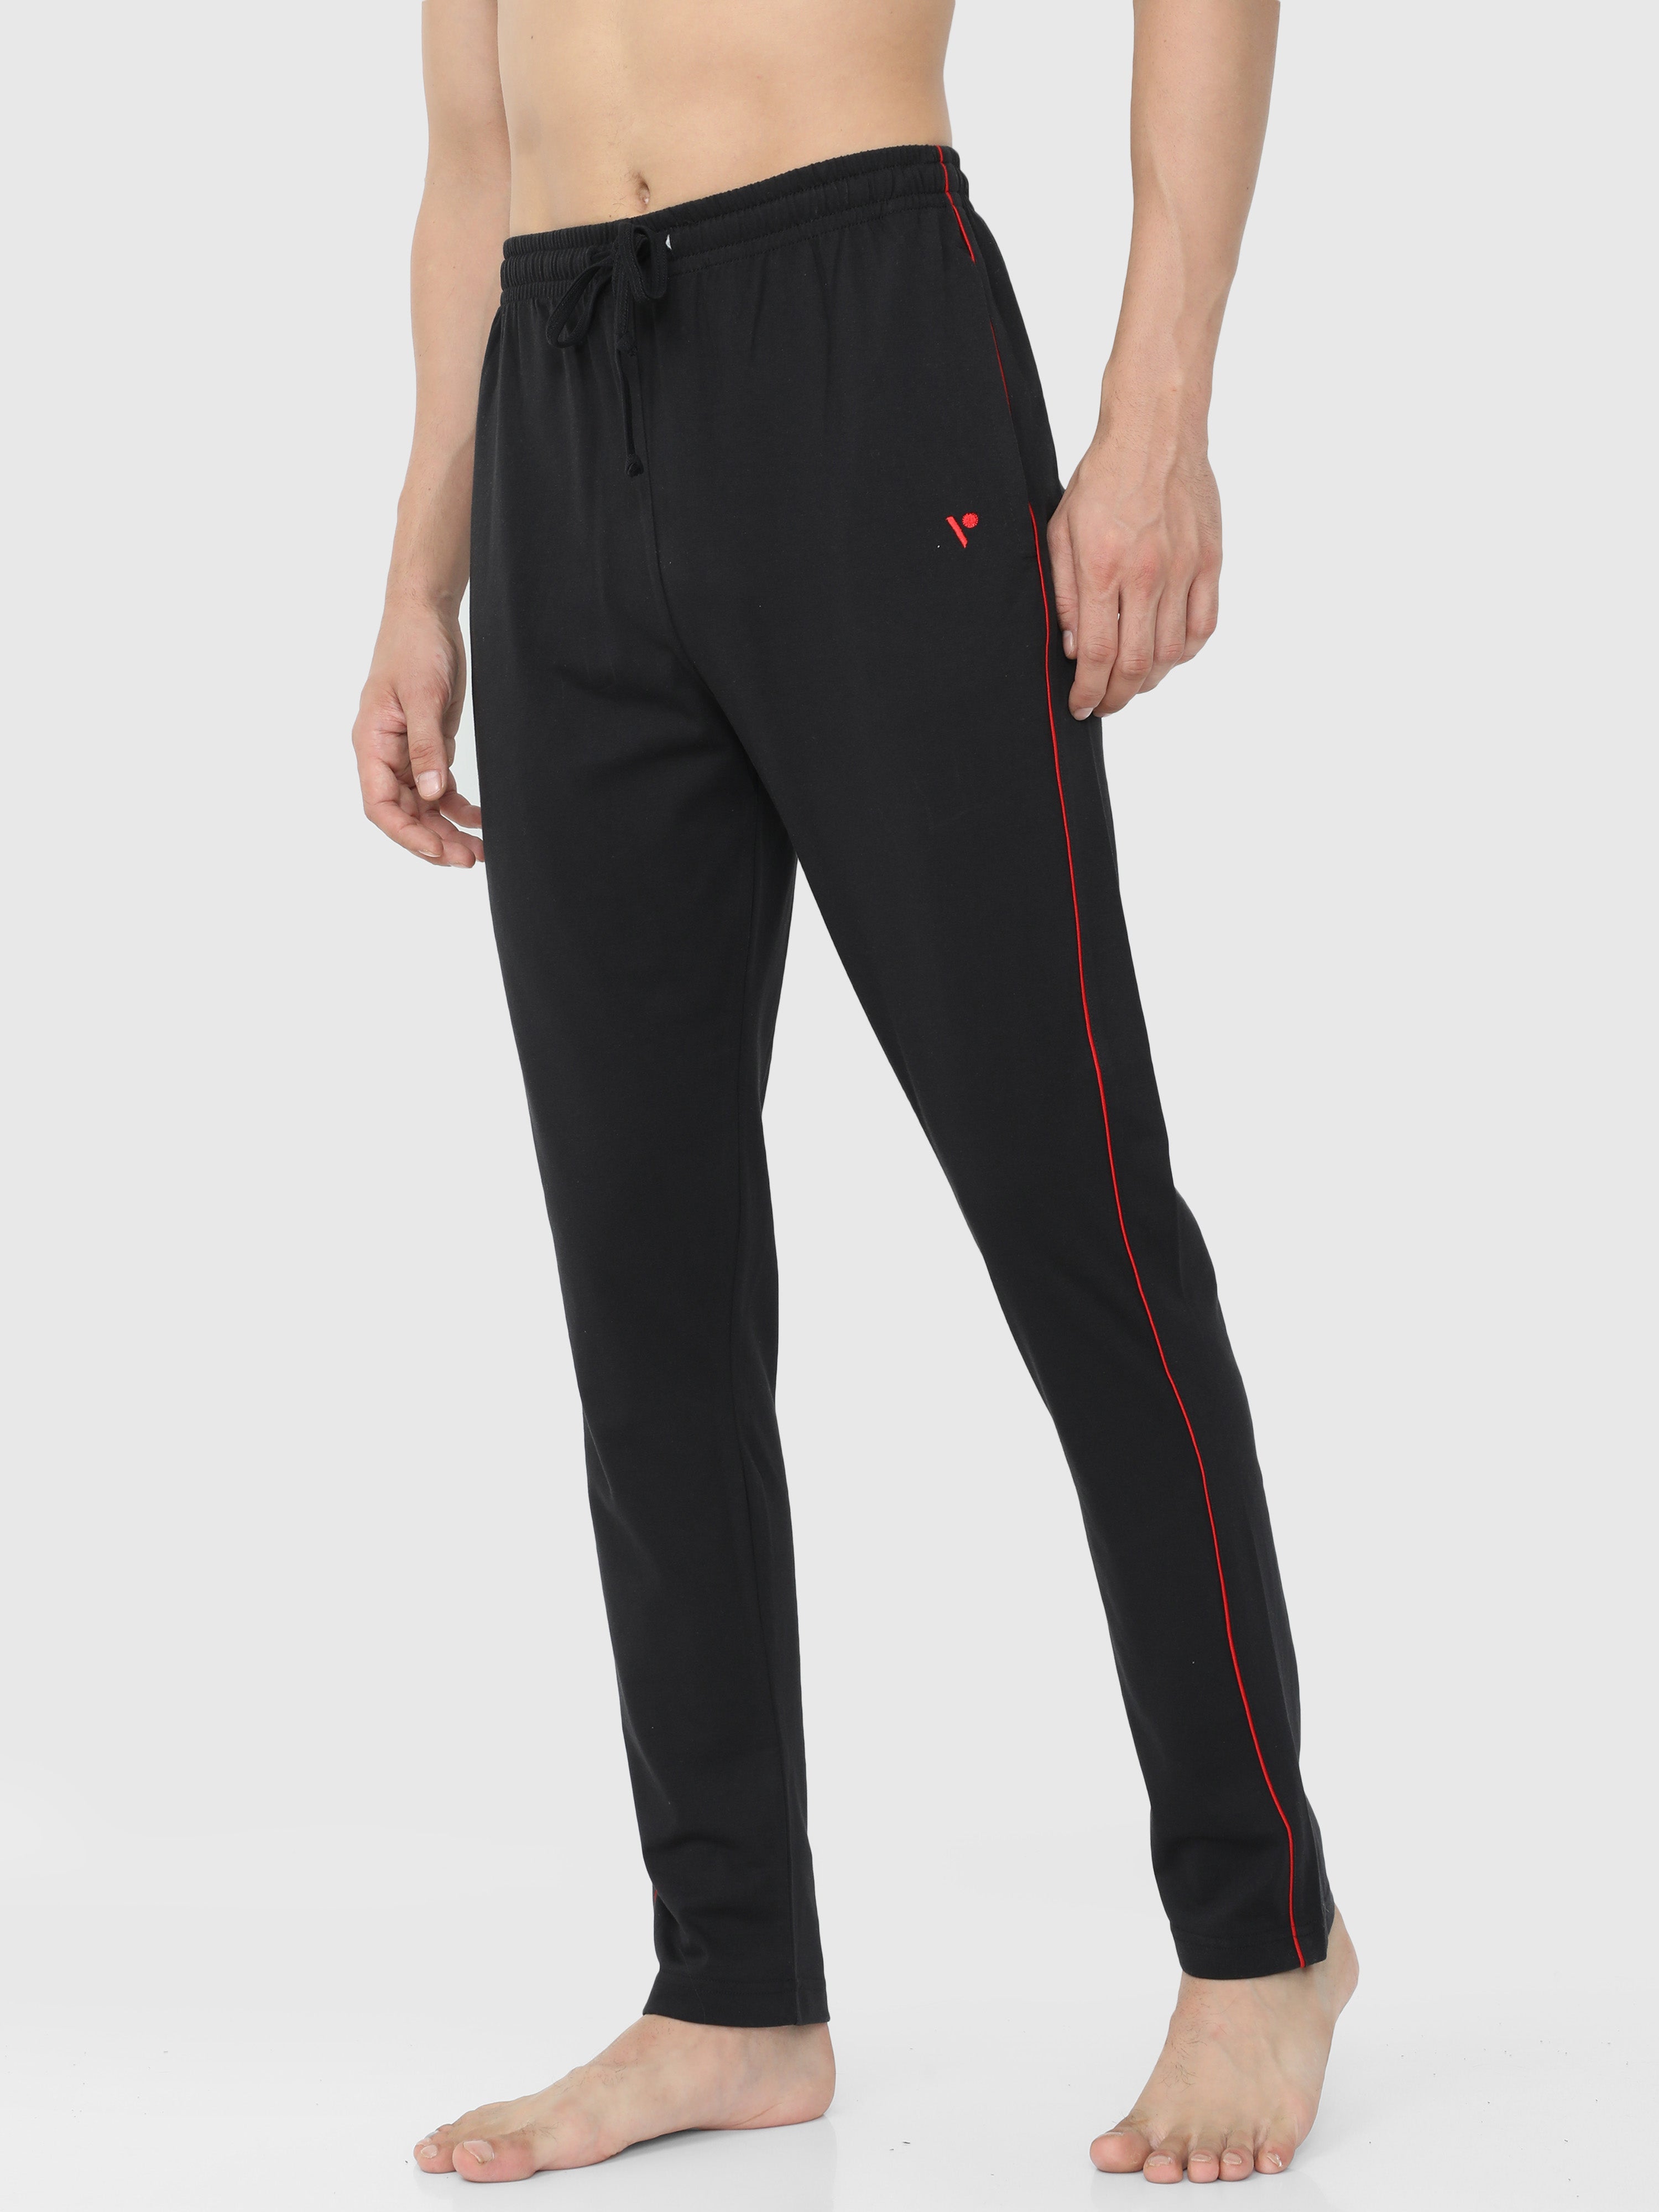 Trackpants: Shop Online Women Navy Blue Polyester Trackpants | Cliths